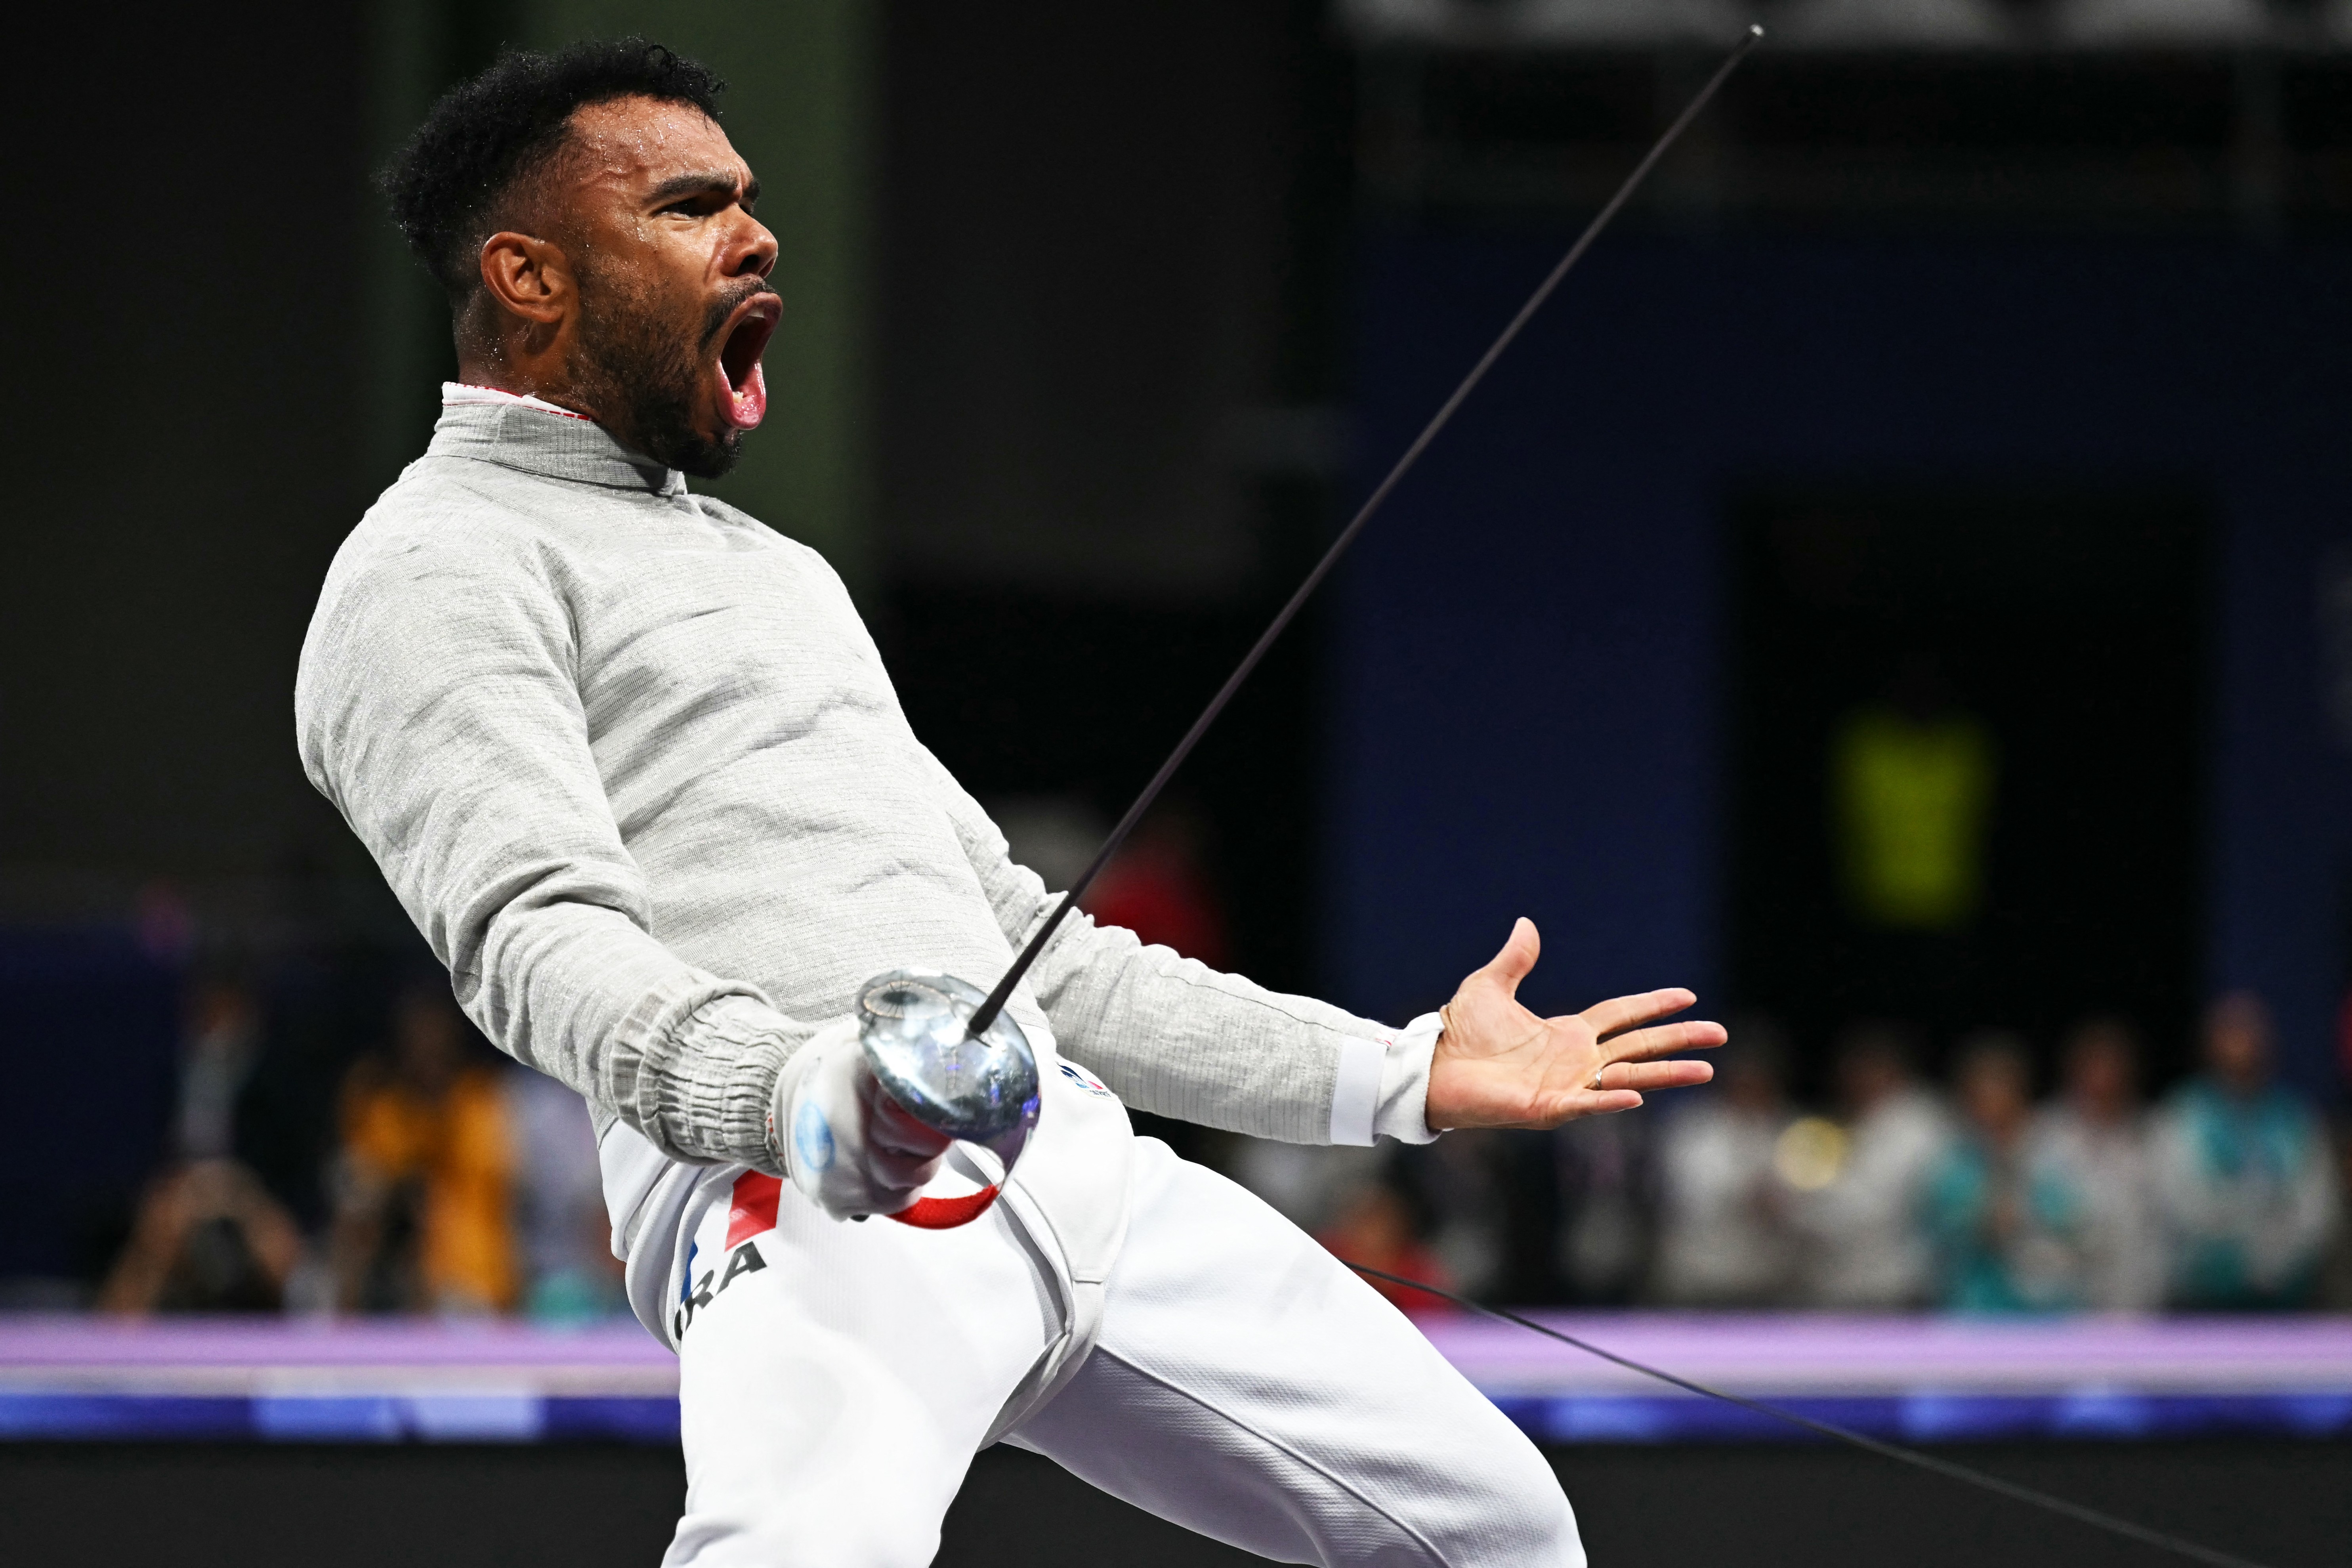 A fencer reacts after a match, arms outstretched, and mouth open.